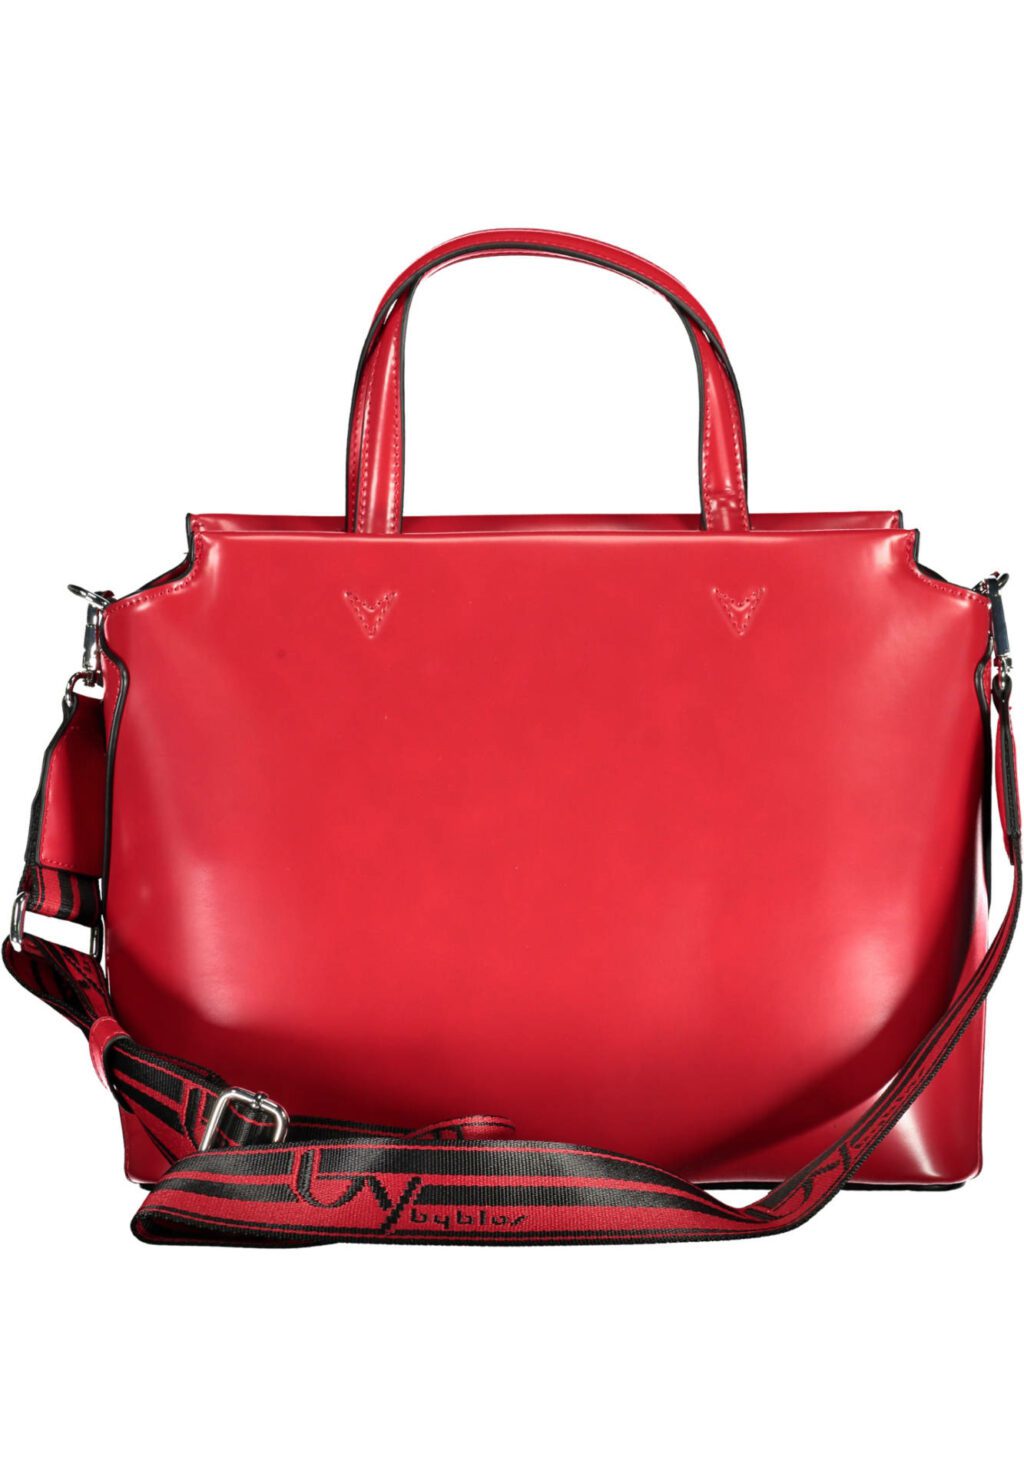 BYBLOS RED WOMEN'S BAG 20100095_ROSSO_4189-CHERRY